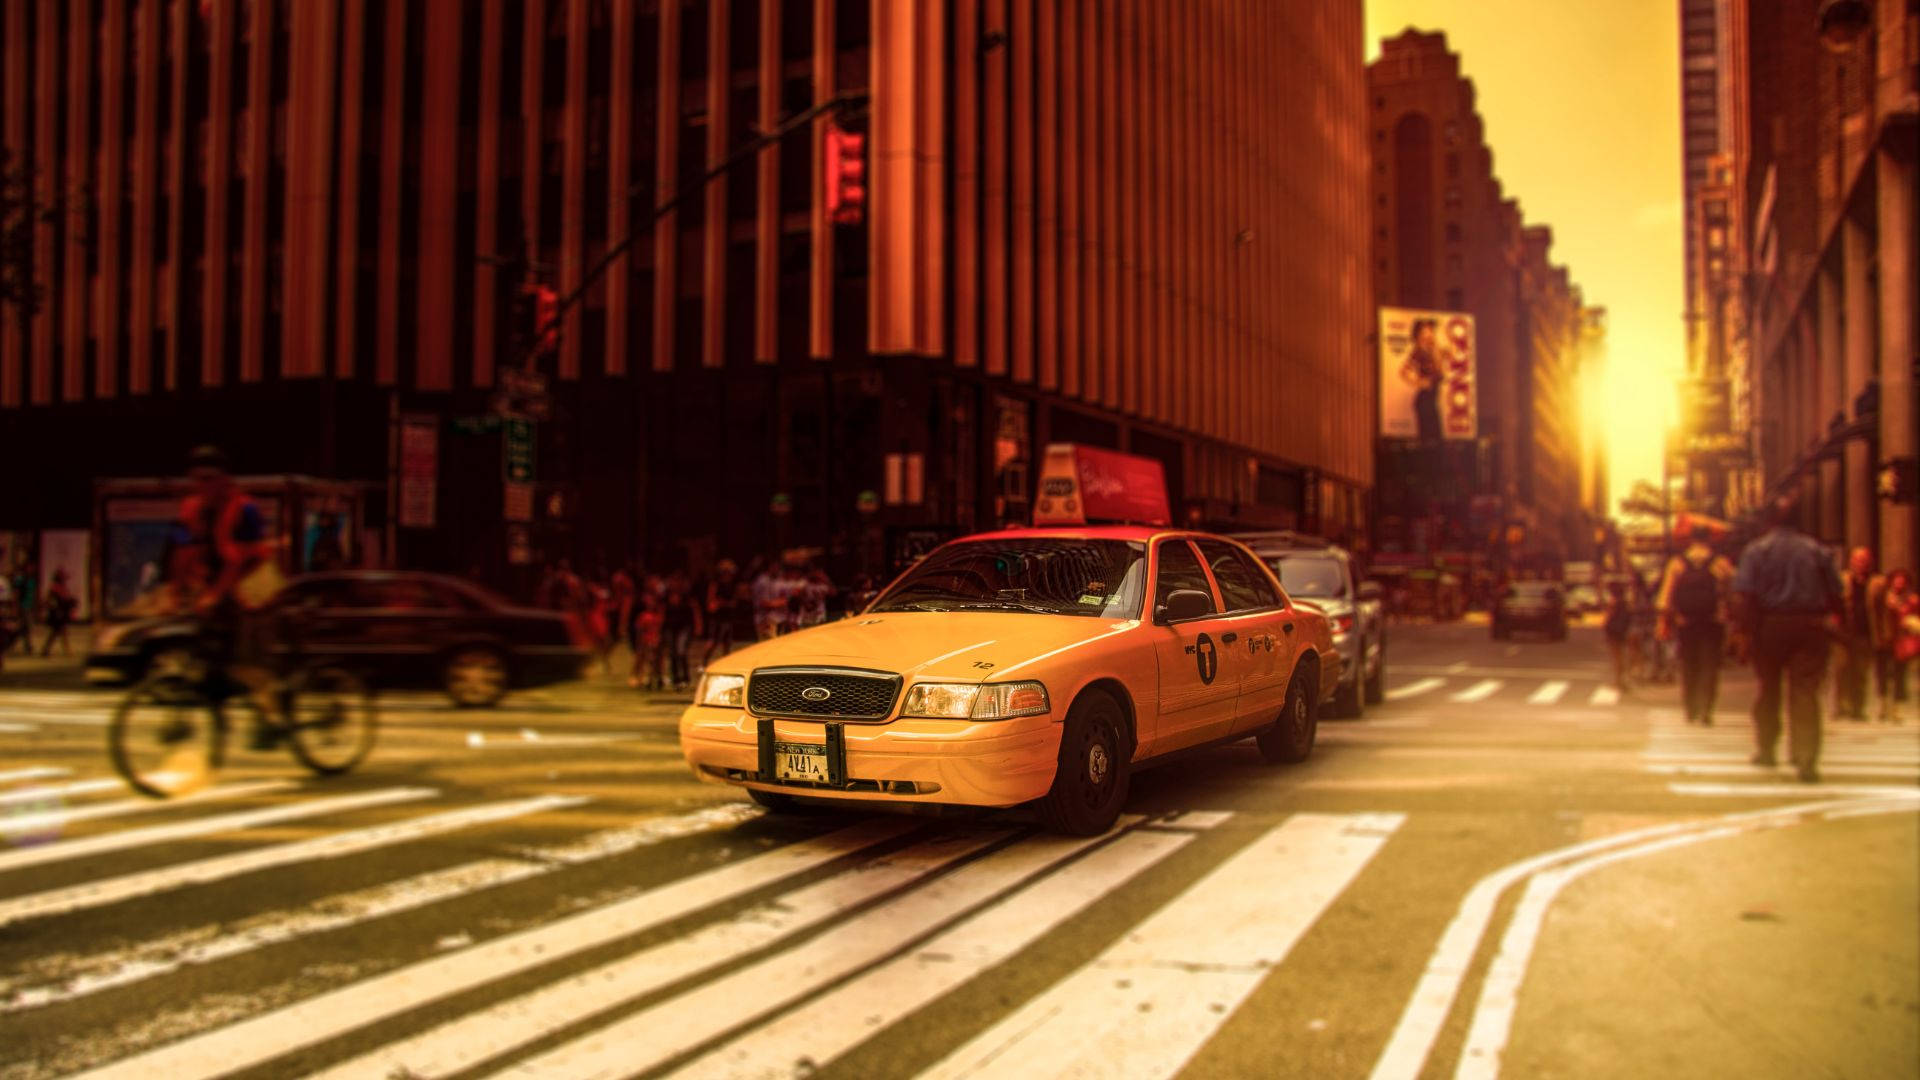 Taxi In The Road With Sunset Wallpaper